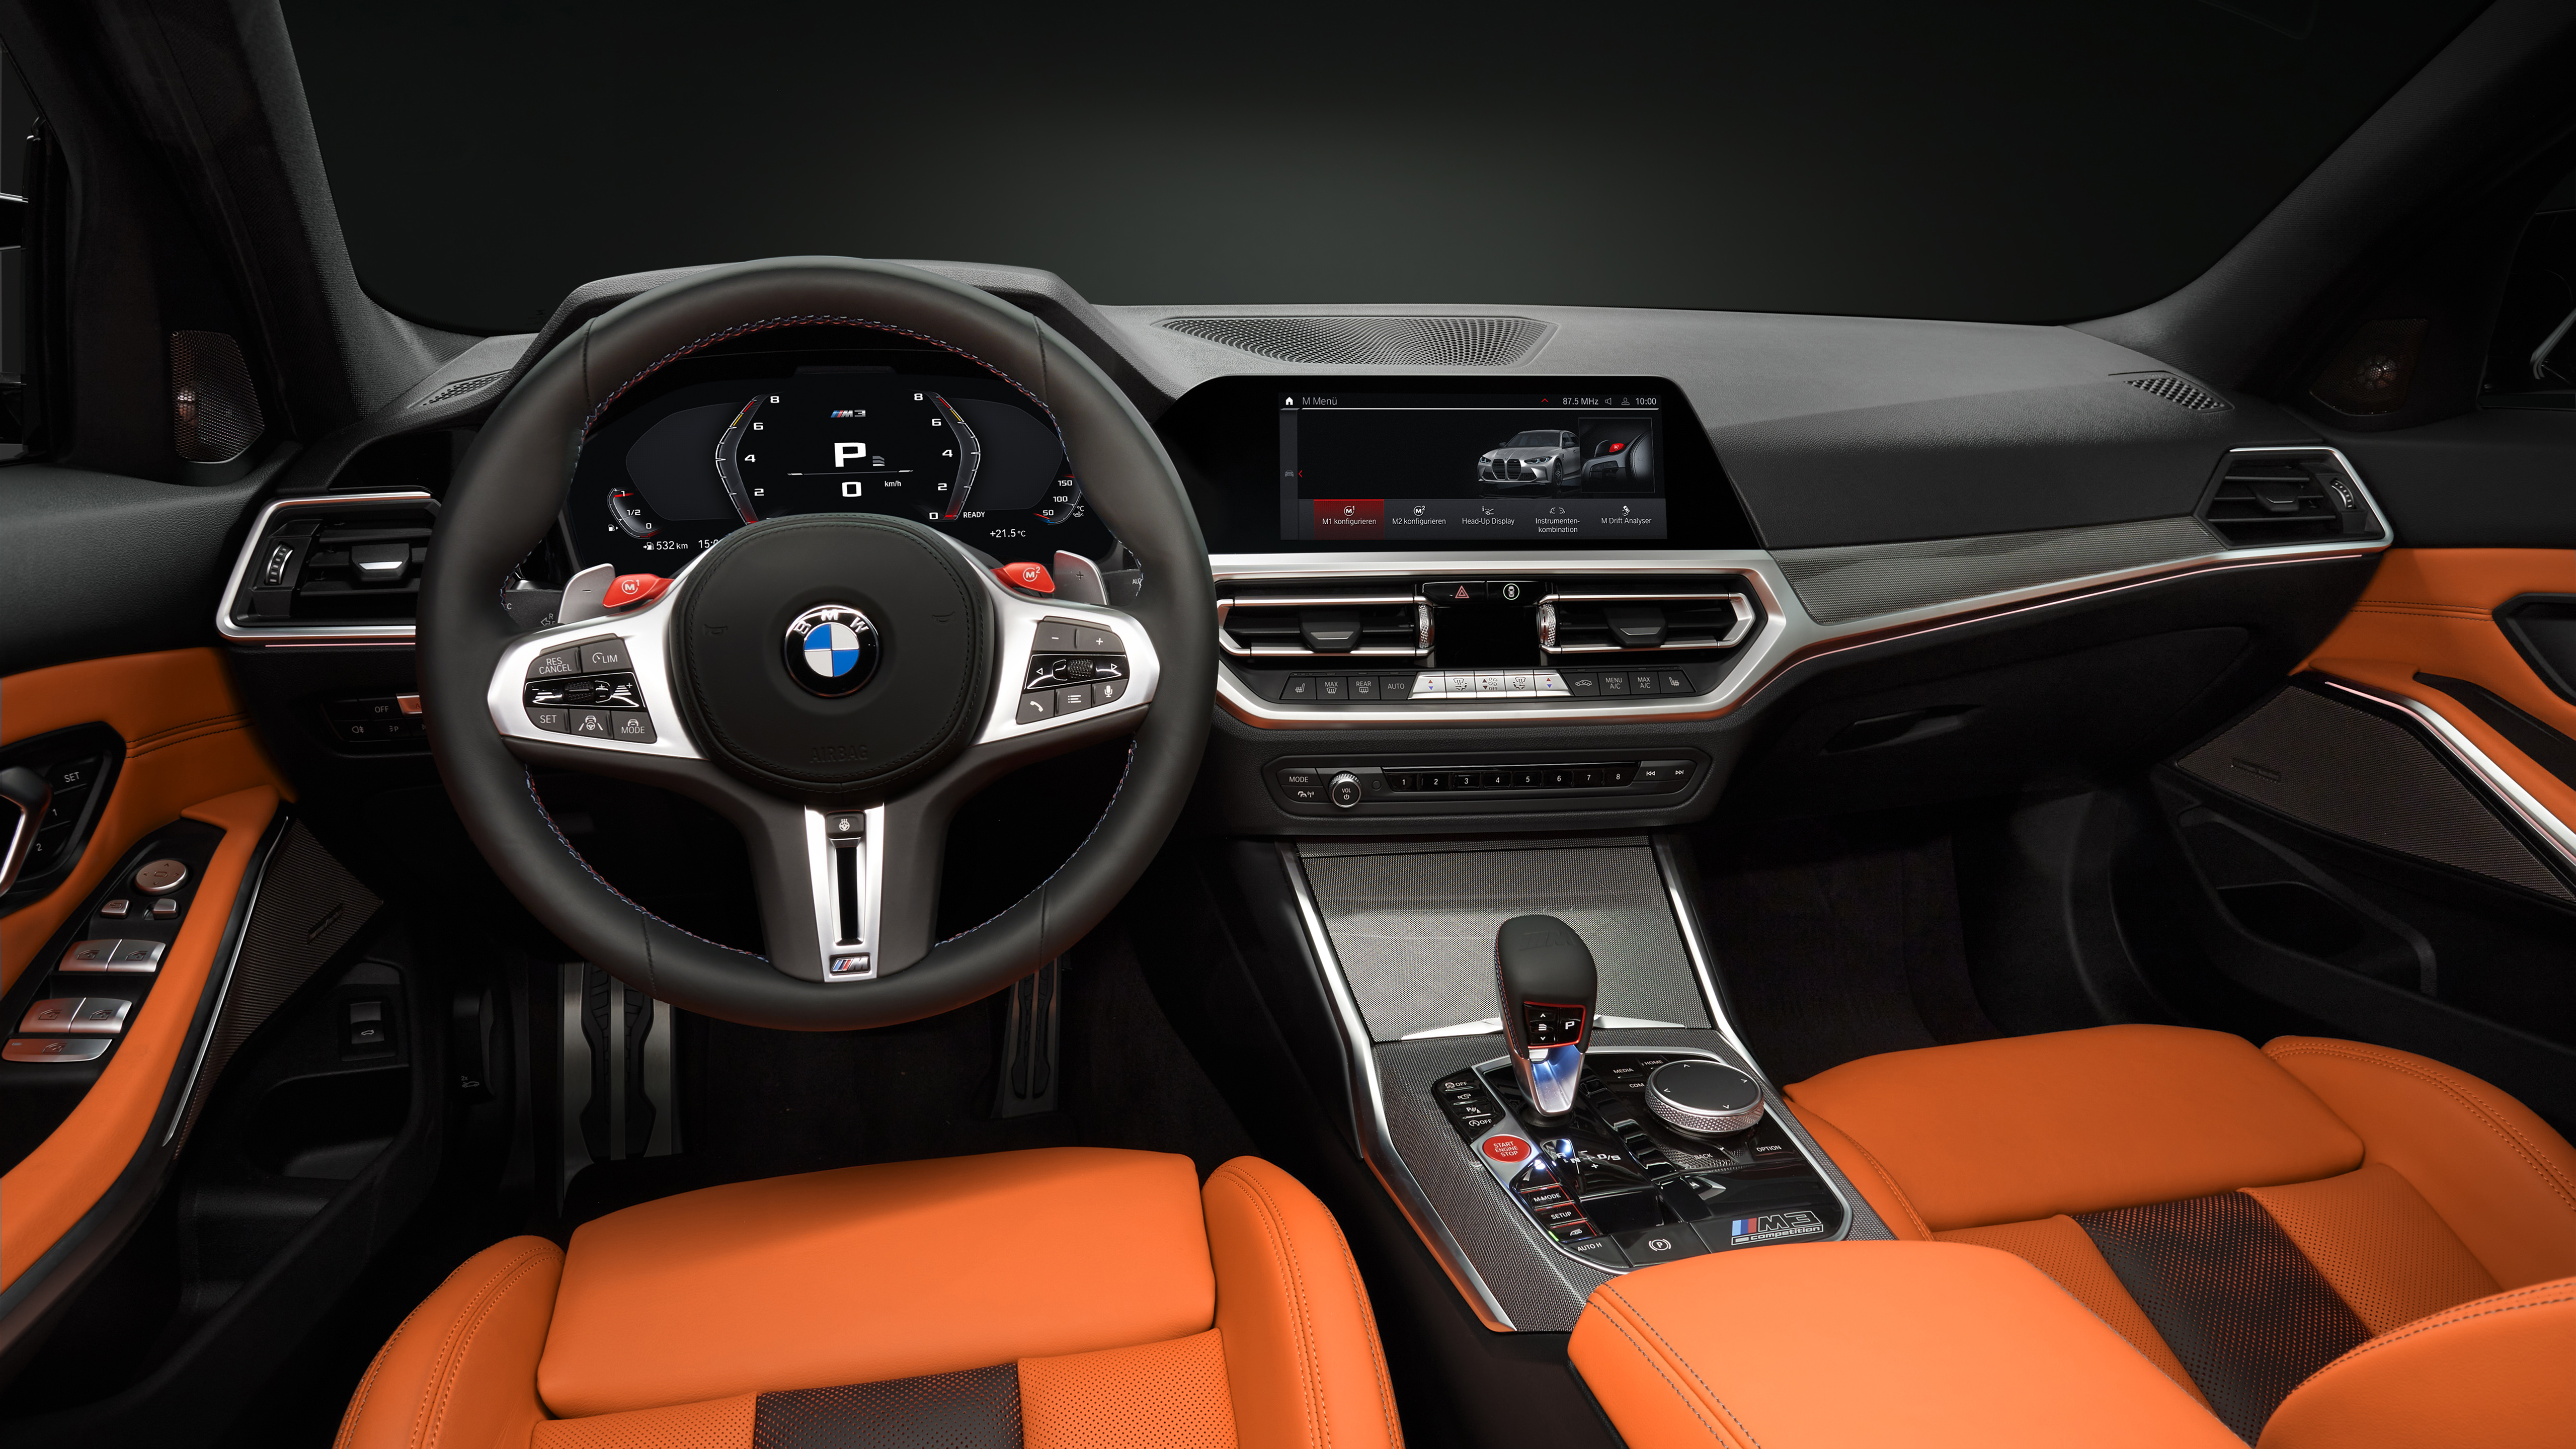 BMW M3 Competition 2020 Interior 4K Wallpaper | HD Car Wallpapers | ID